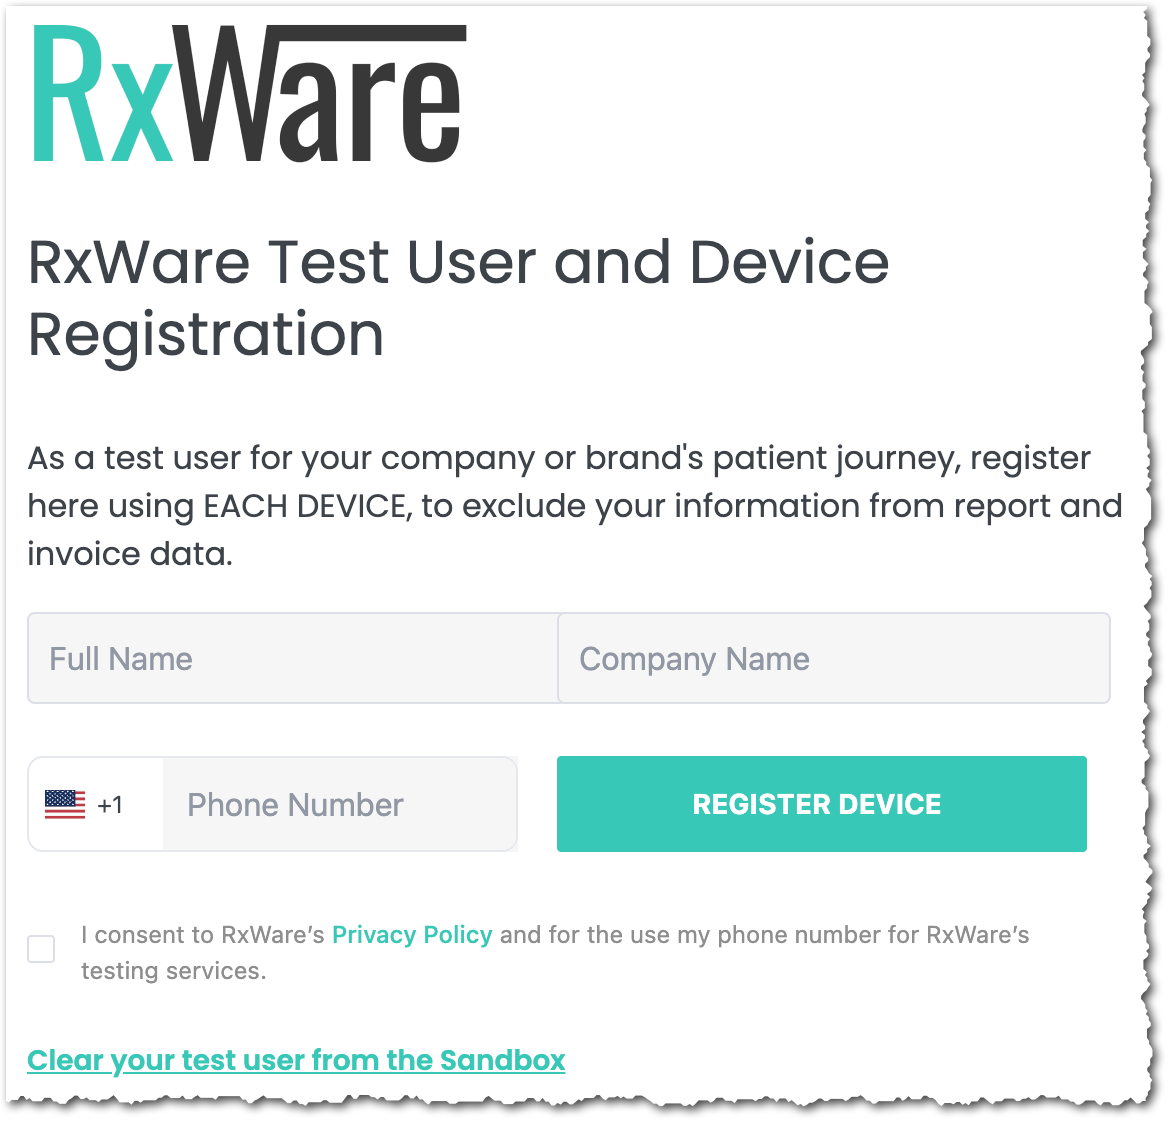 RxWare Test User and Device Registration screenshot